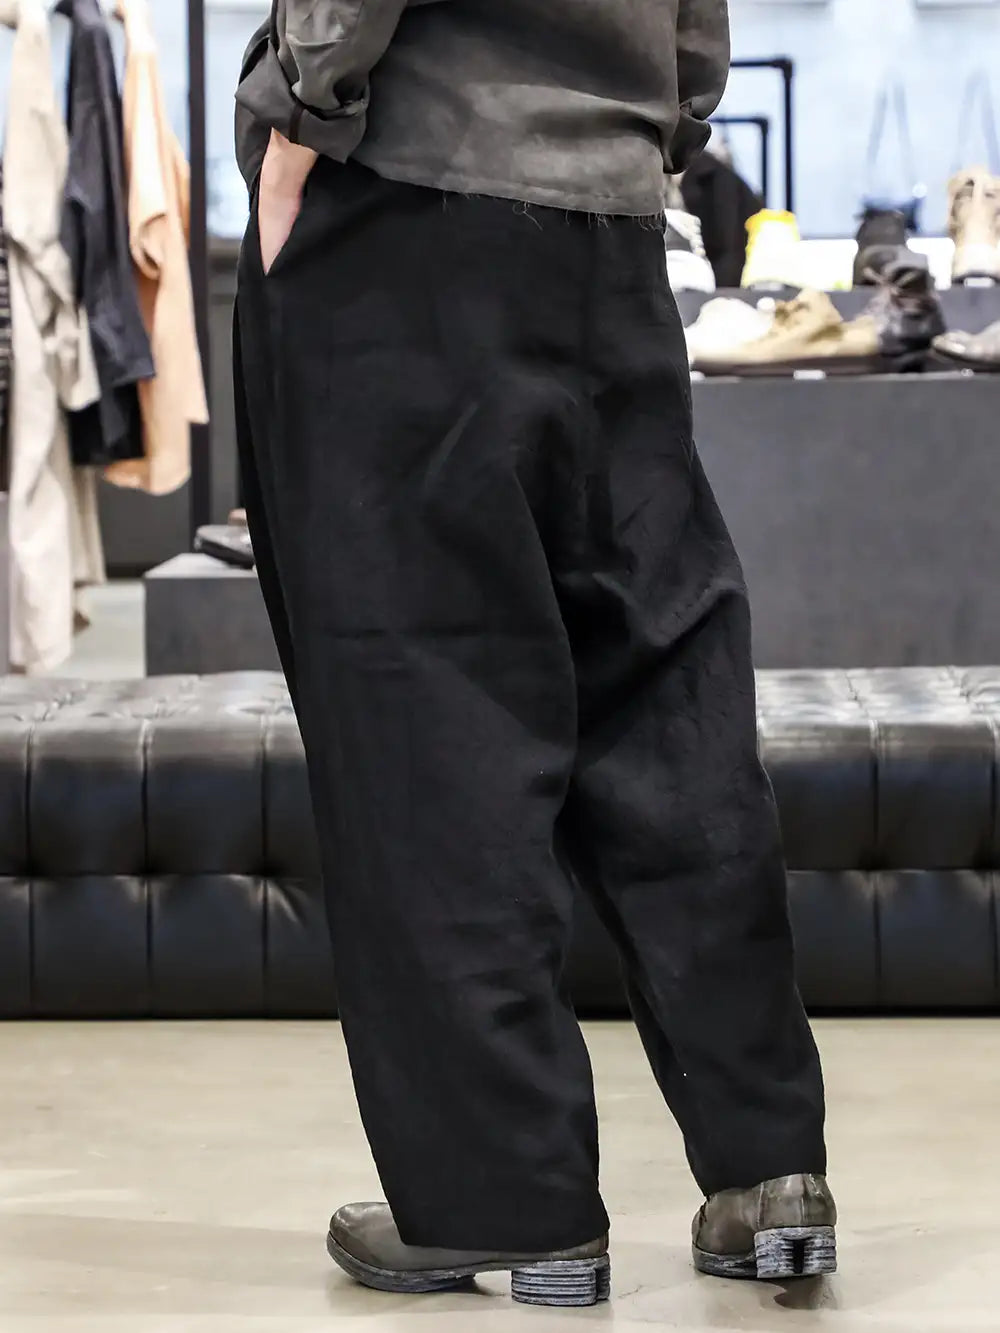 DEVOA Forme D'expression 24SS - Collaboration with refined classic pants and shoes - UP033 / 006B 2 Tucked Wide Leg Pants FWI-GDCT-Fade-Gray incarnation x DEVOA Shoe Horse Leather Garment Dye 3-003